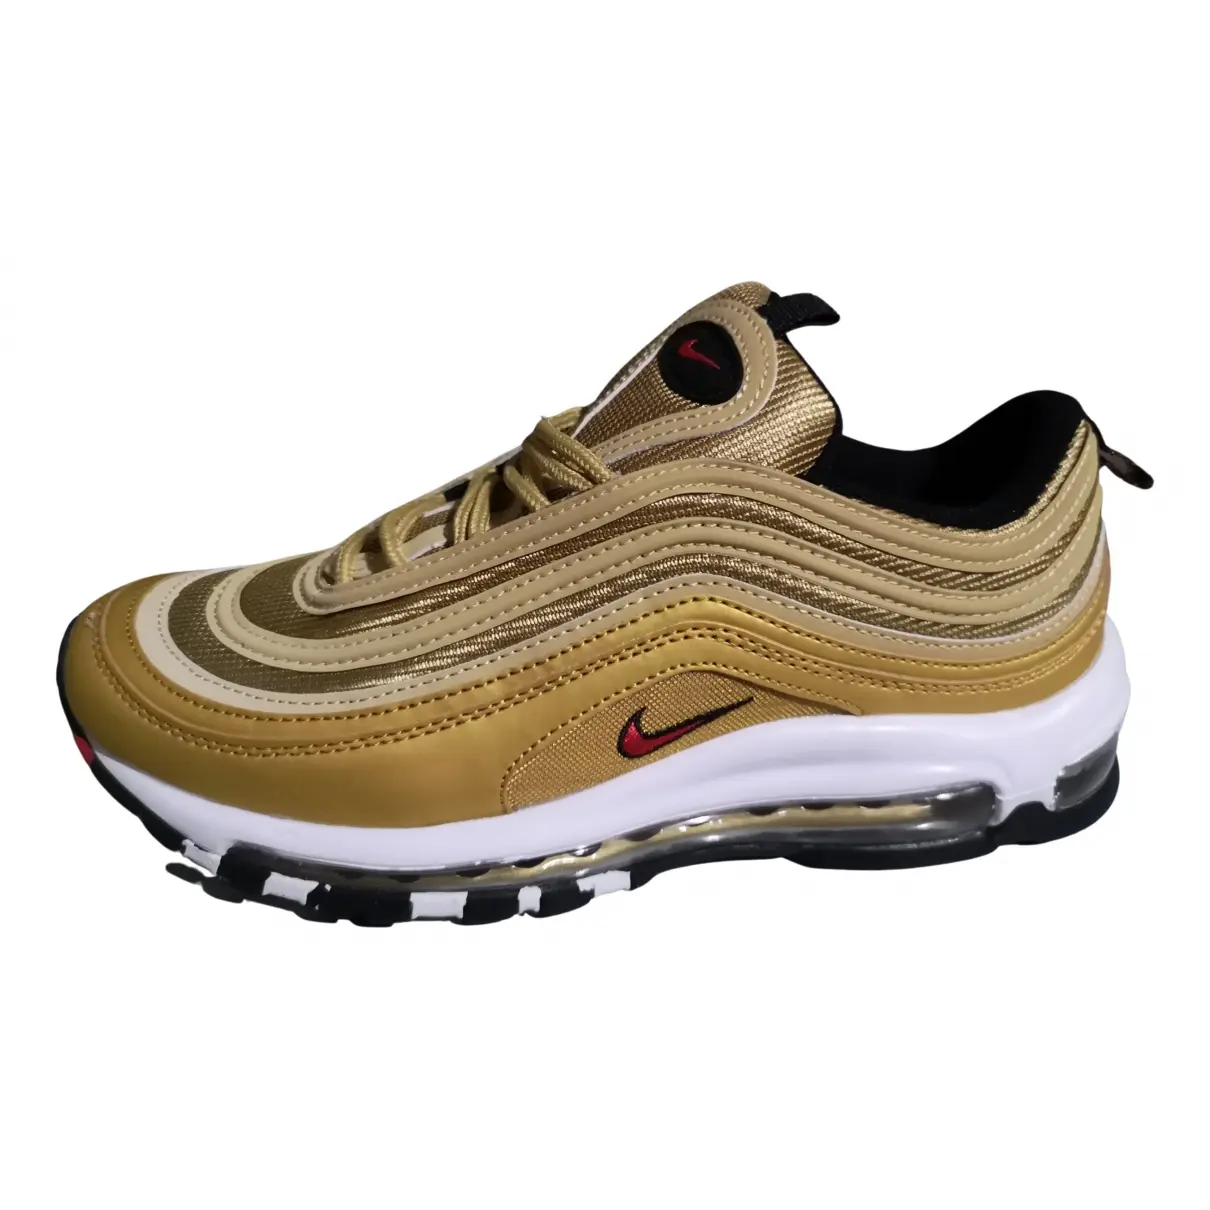 Air Max 97 cloth low trainers Nike